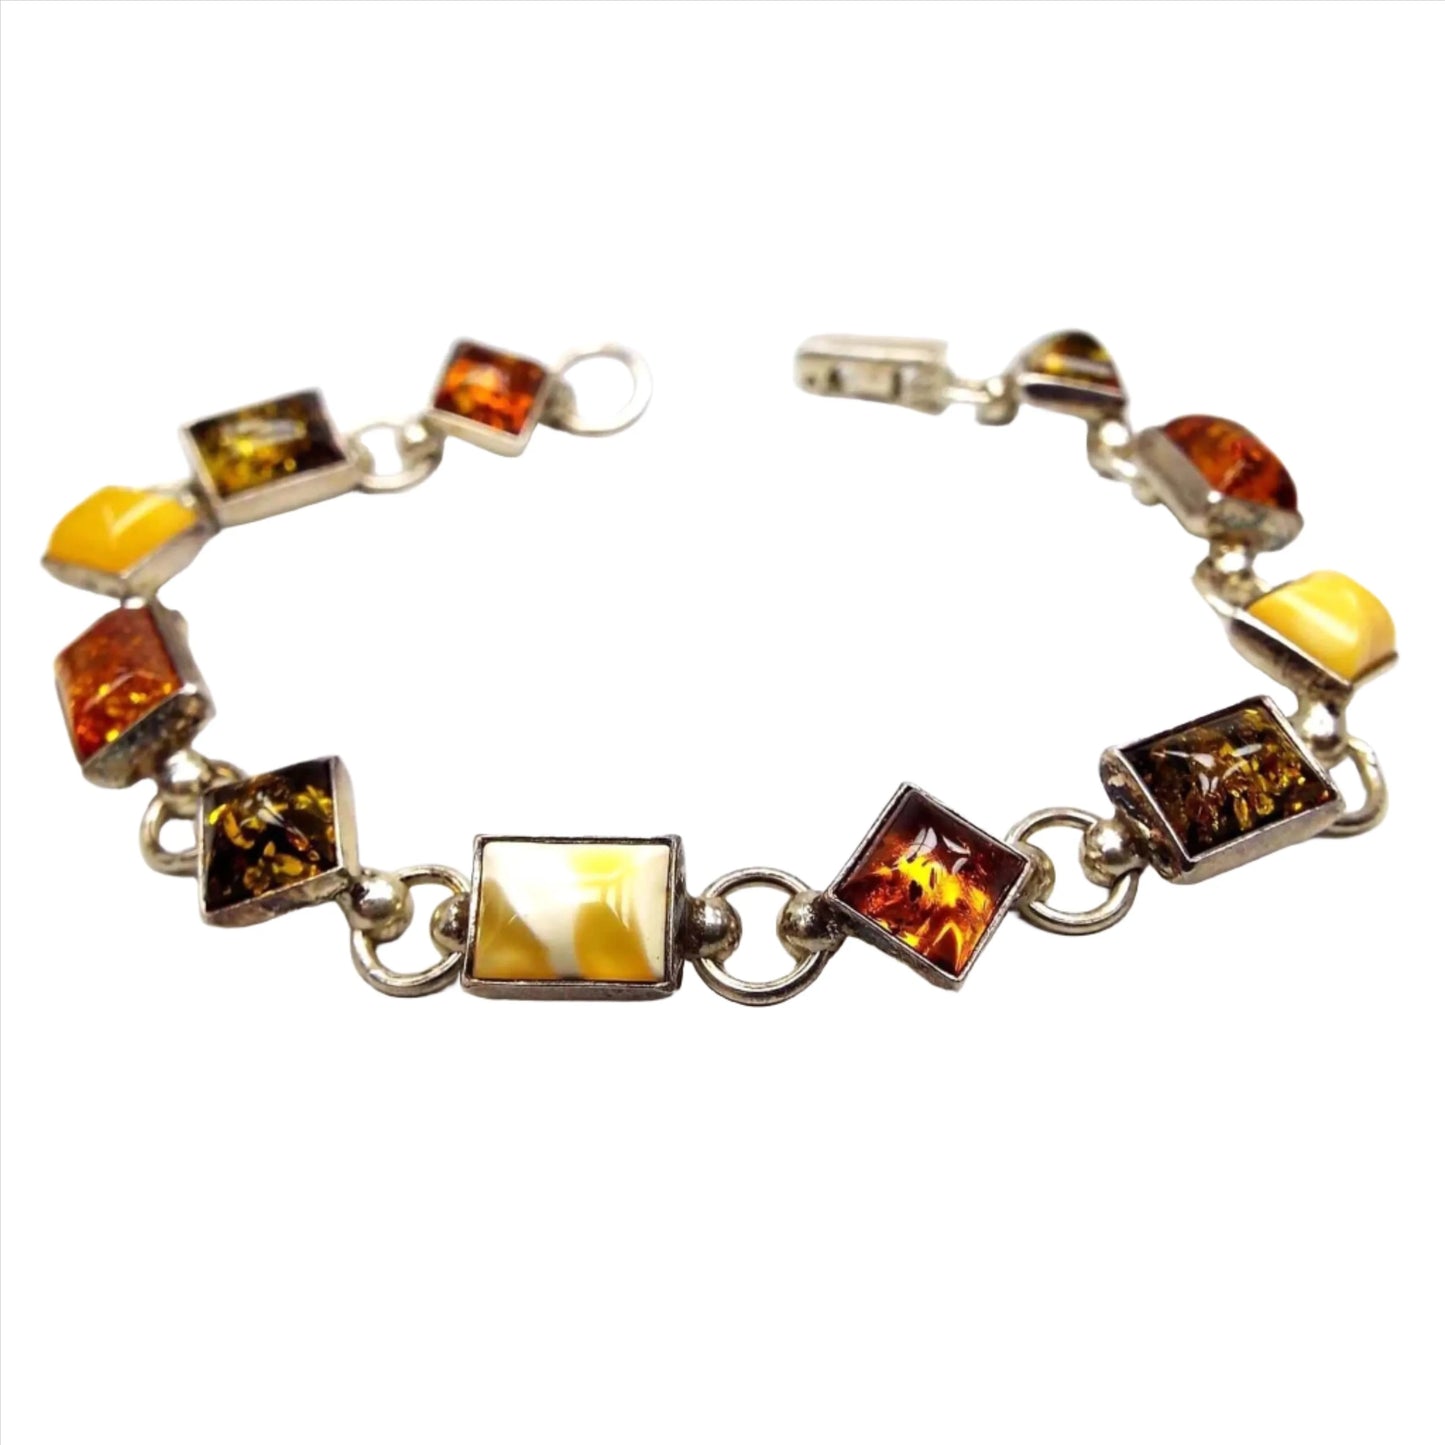 Top view of the Mid Century Baltic amber link bracelet. The setting is sterling silver and has alternating diamond shaped and rectangle shaped links. Each link has an amber cab. The amber has alternating colors of dark orange, olive green, and a yellow amber that is a marbled light to dark yellow color. There is a snap lock clasp on the end.